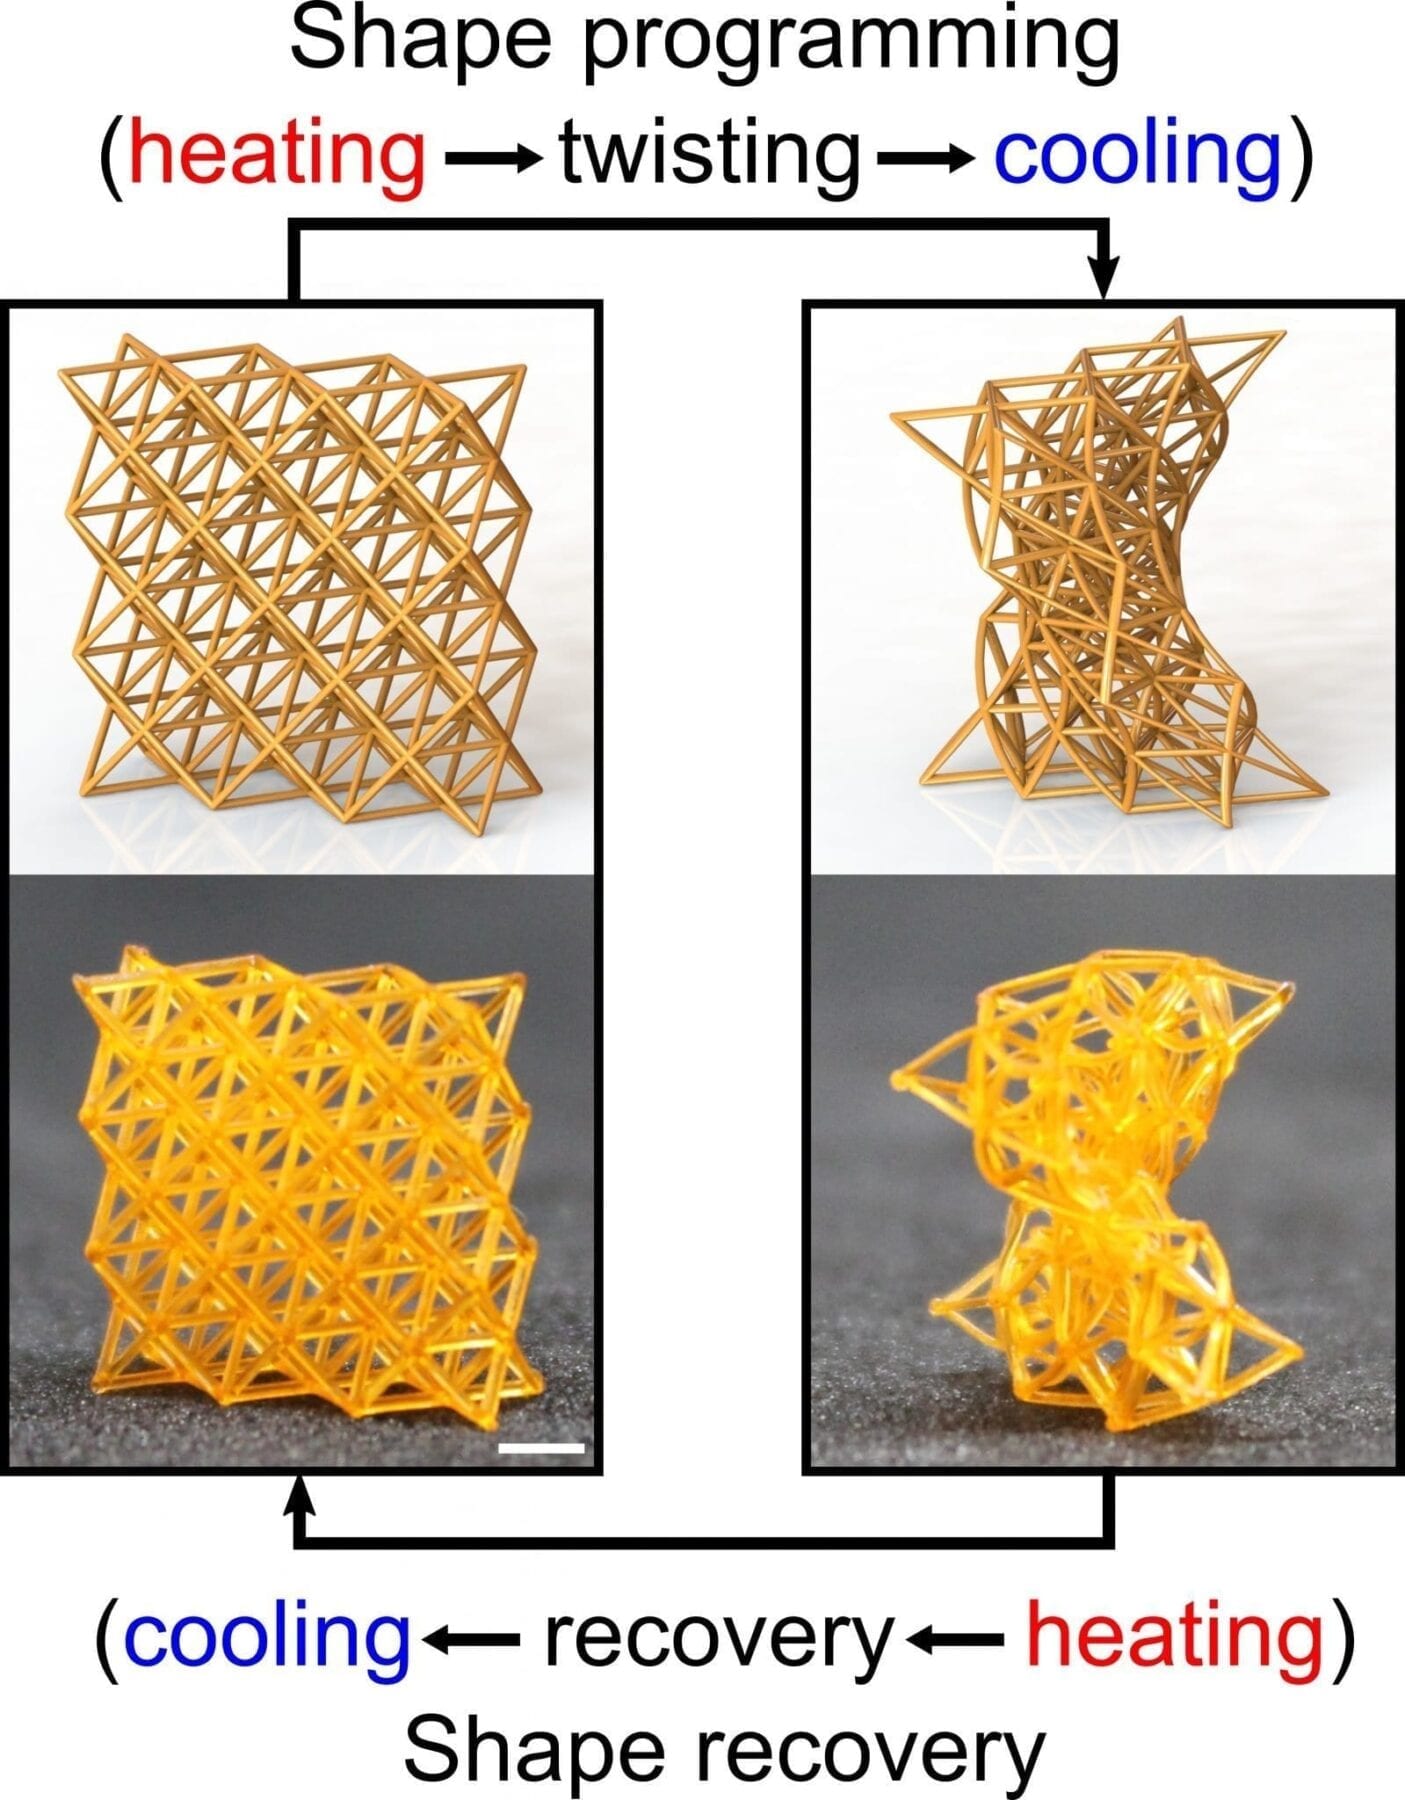 4D printed shape programming materials can be as stiff as wood or as soft as a sponge